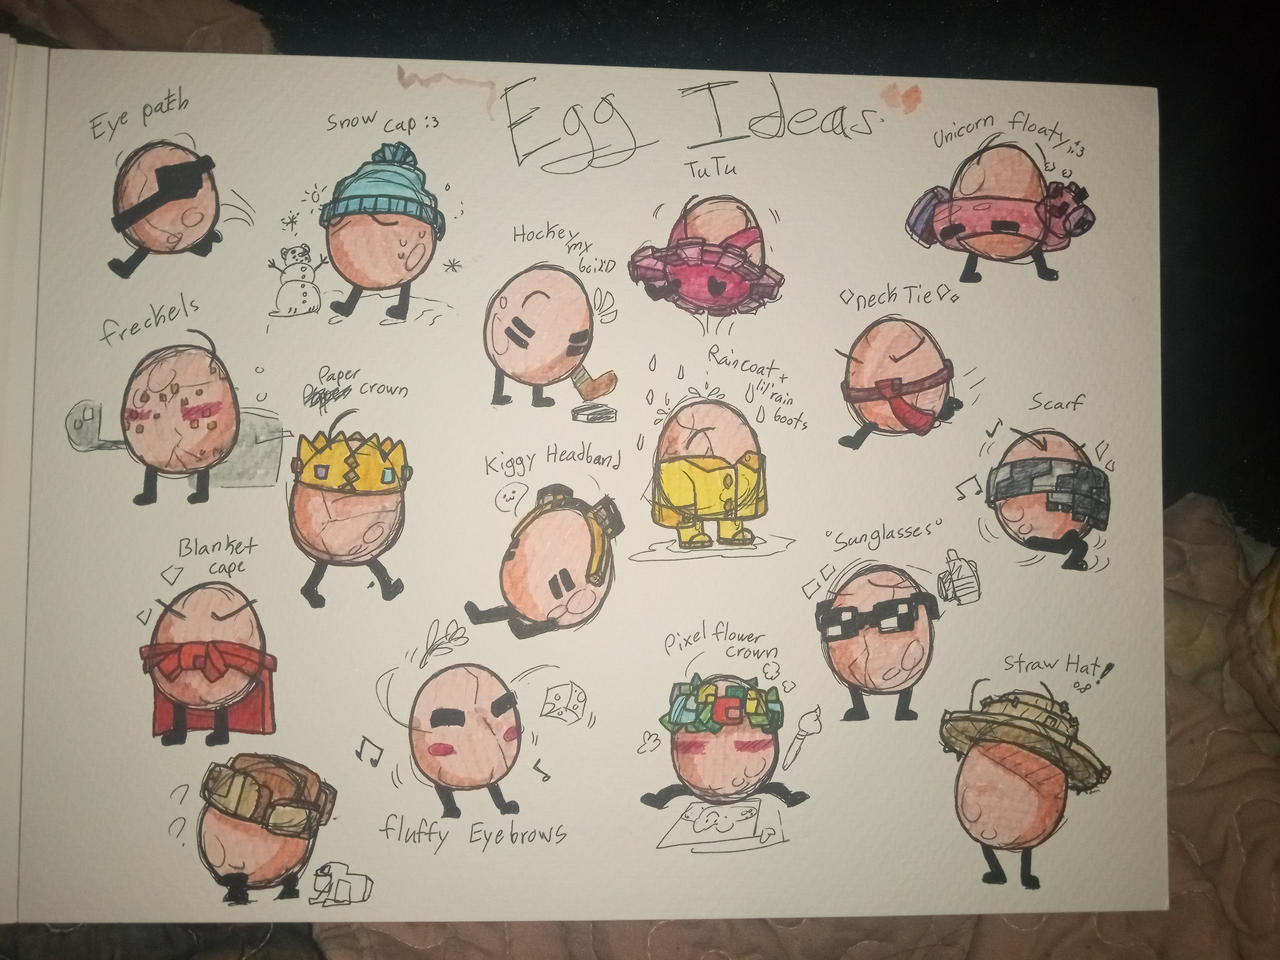 QSMP Eggs hanging out by DoctorTrick17 on DeviantArt